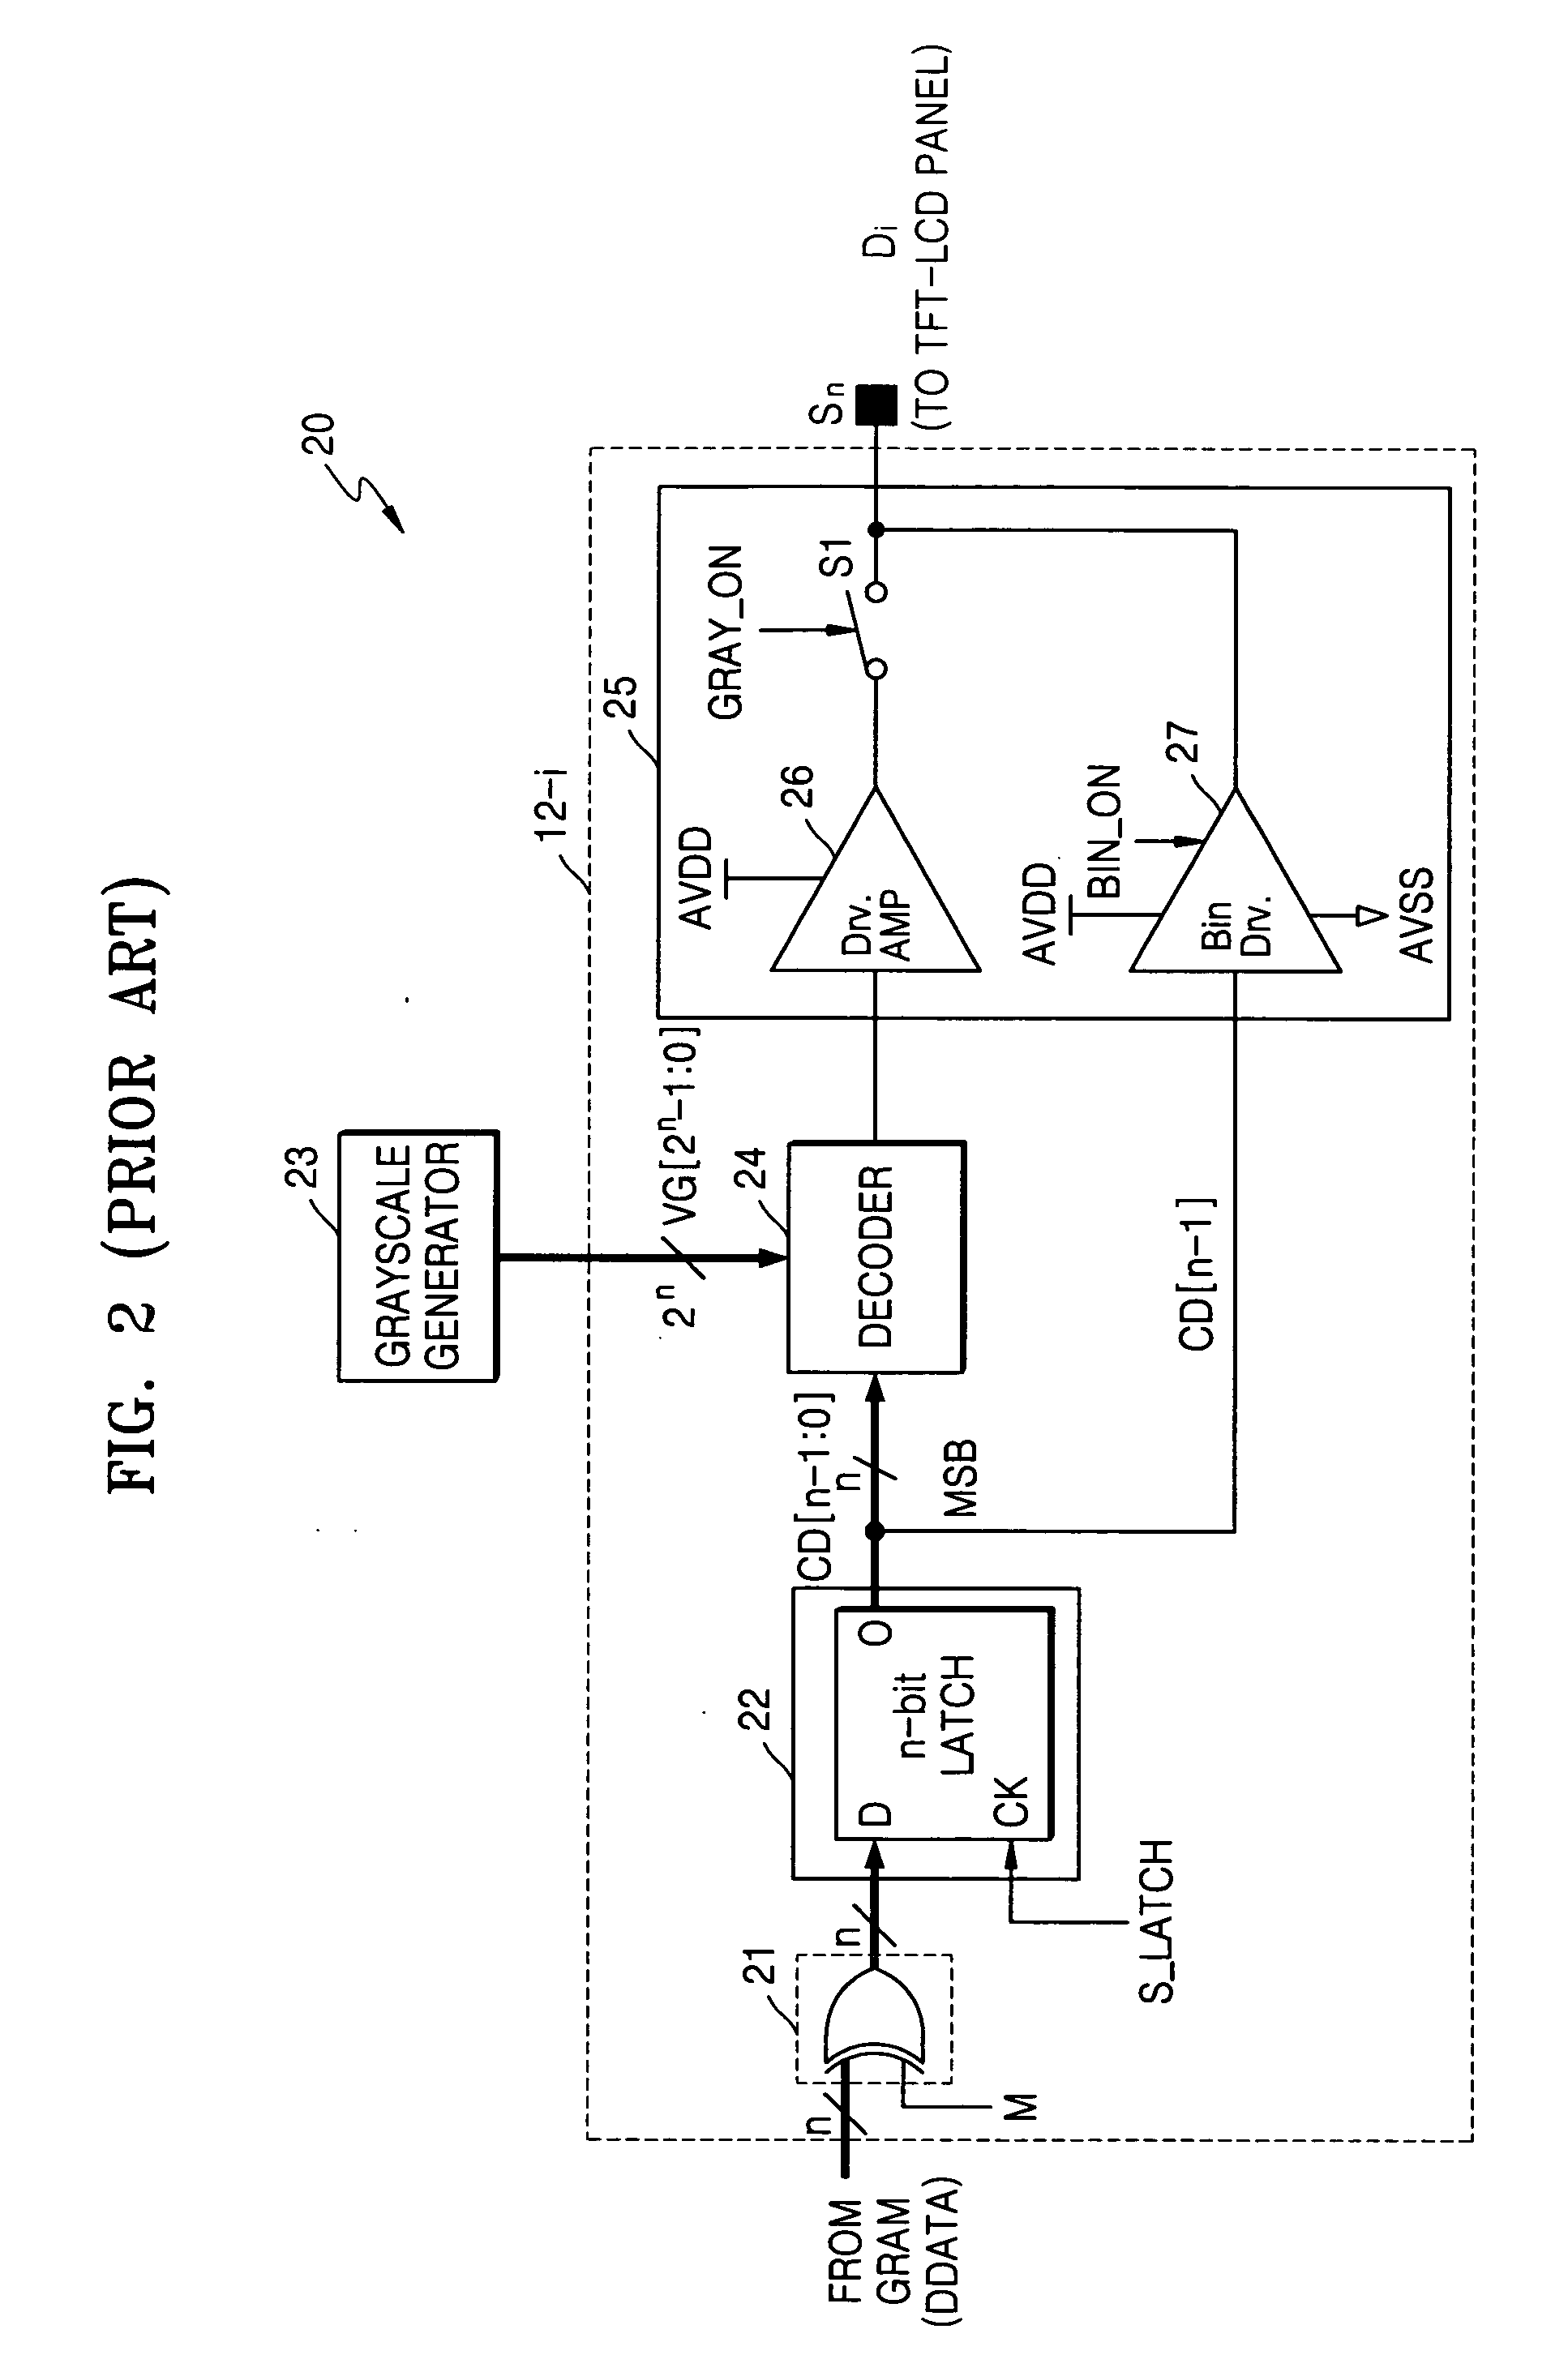 Common Voltage driver circuits and methods providing reduced power consumption for driving flat panel displays